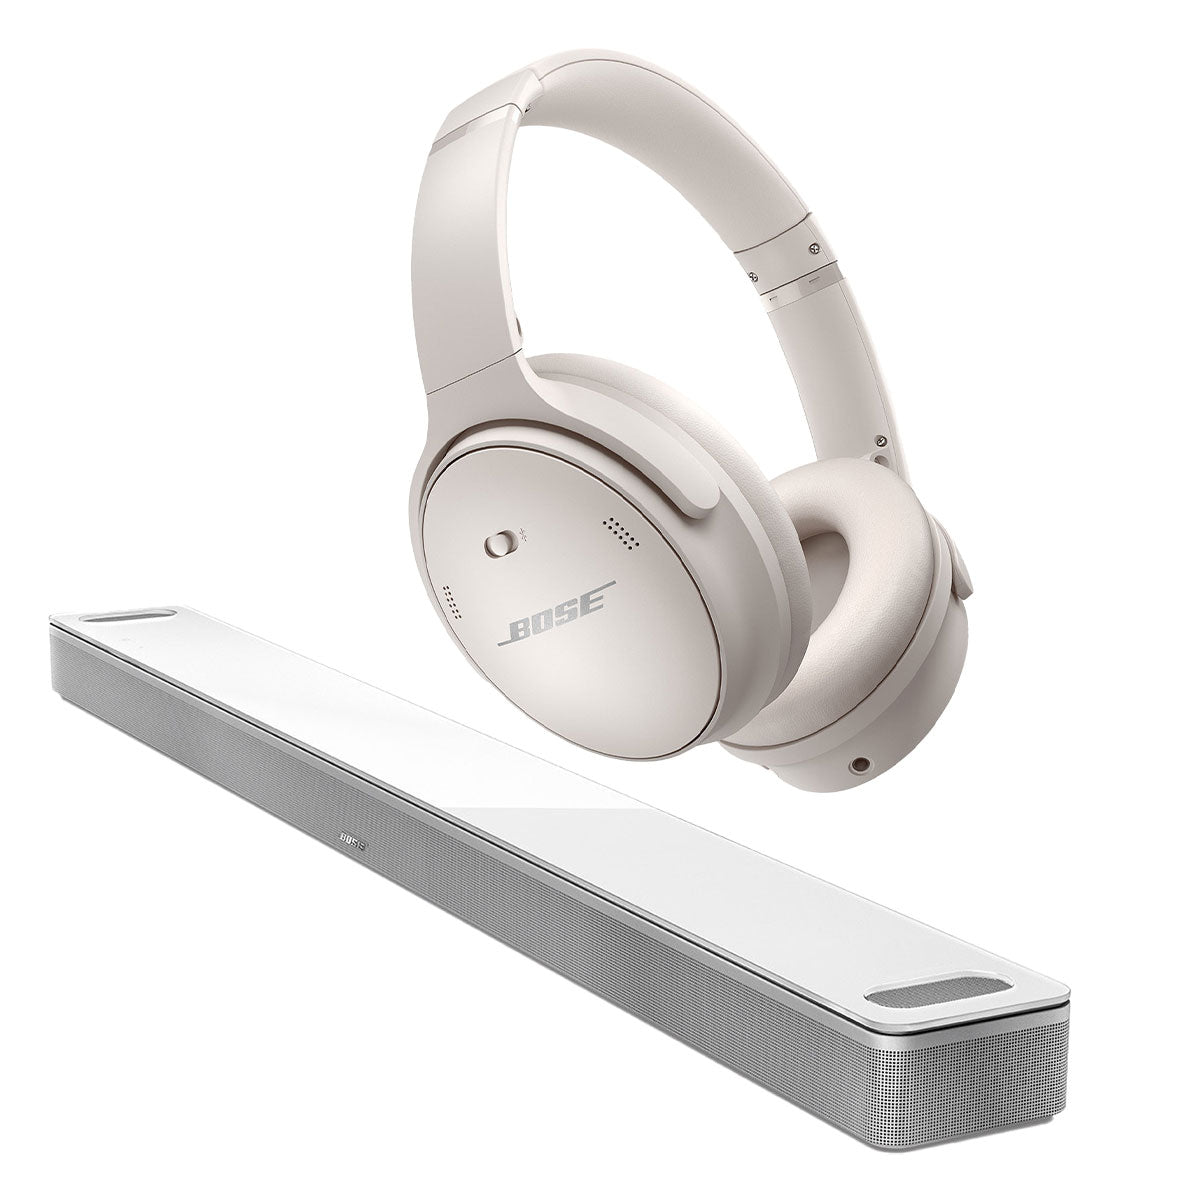 Bose QuietComfort 45 Wireless Noise Canceling Headphones (White) and Bose Smart Soundbar 900 with Dolby Atmos (White)